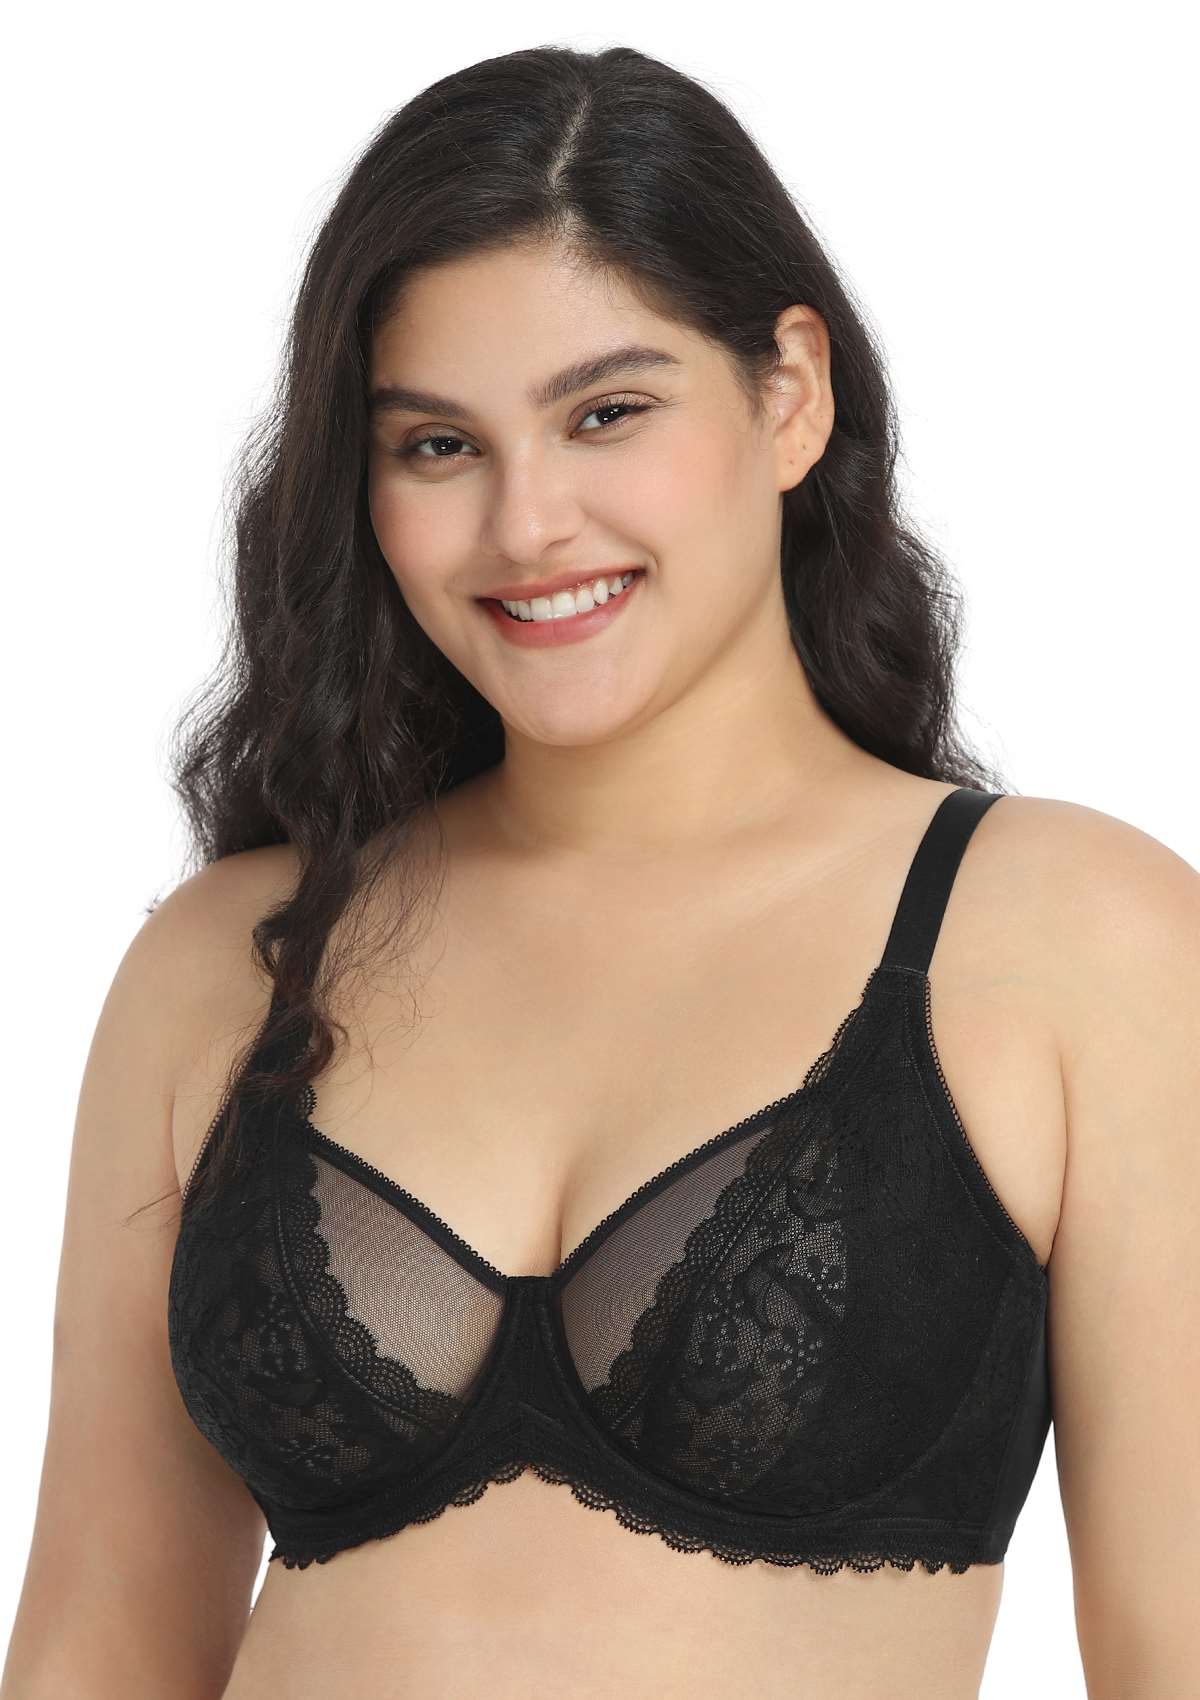 HSIA Anemone Big Bra: Best Bra For Lift And Support, Floral Bra - Black / 38 / DD/E